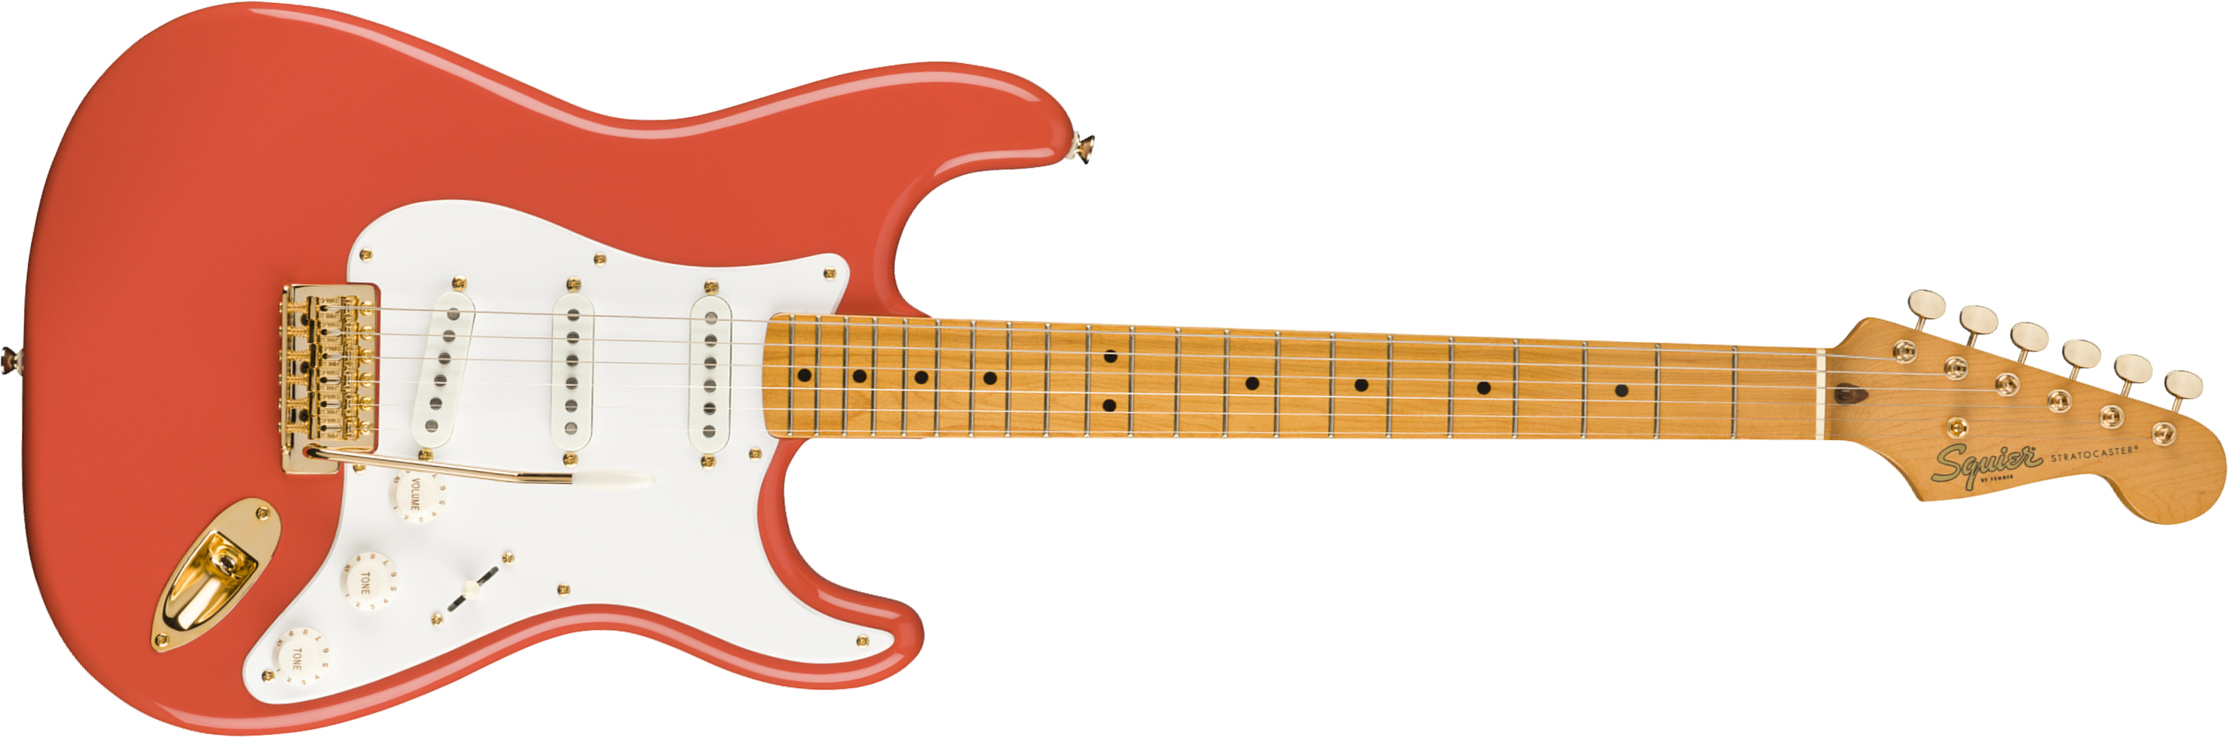 Squier Strat Classic Vibe '50s Fsr Ltd Mn - Fiesta Red With Gold Hardware - E-Gitarre in Str-Form - Main picture